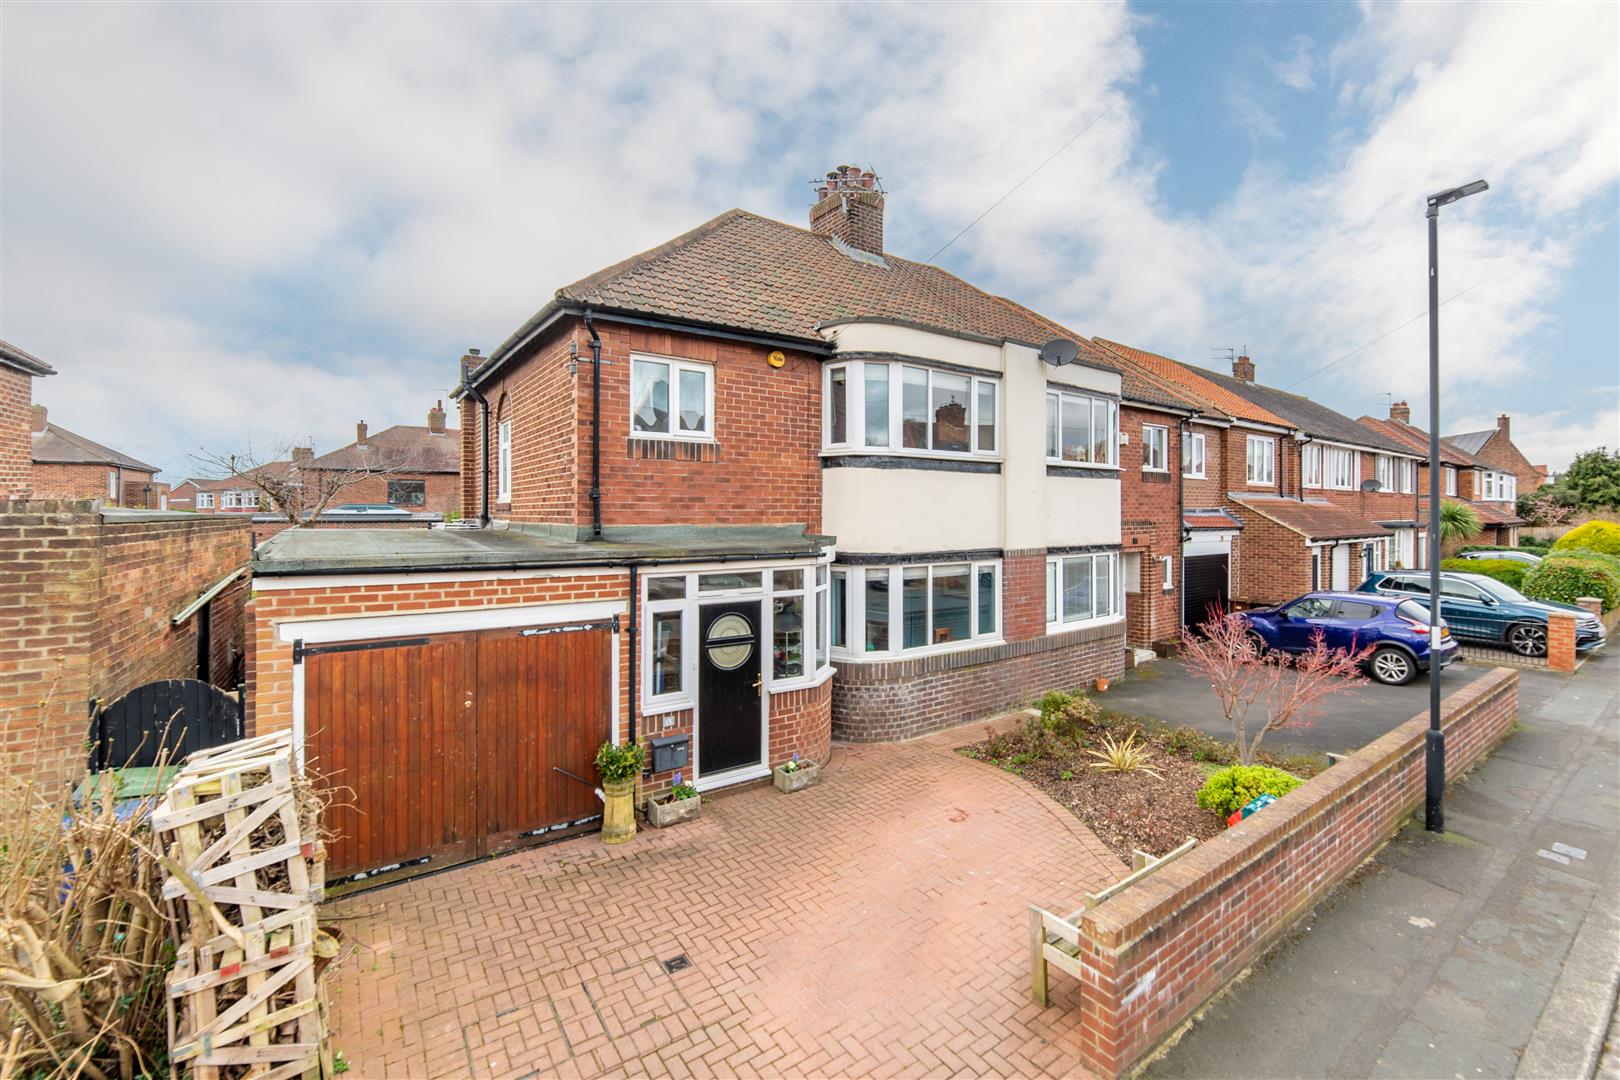 3 bed semi-detached house for sale in Polwarth Road, Newcastle Upon Tyne - Property Image 1